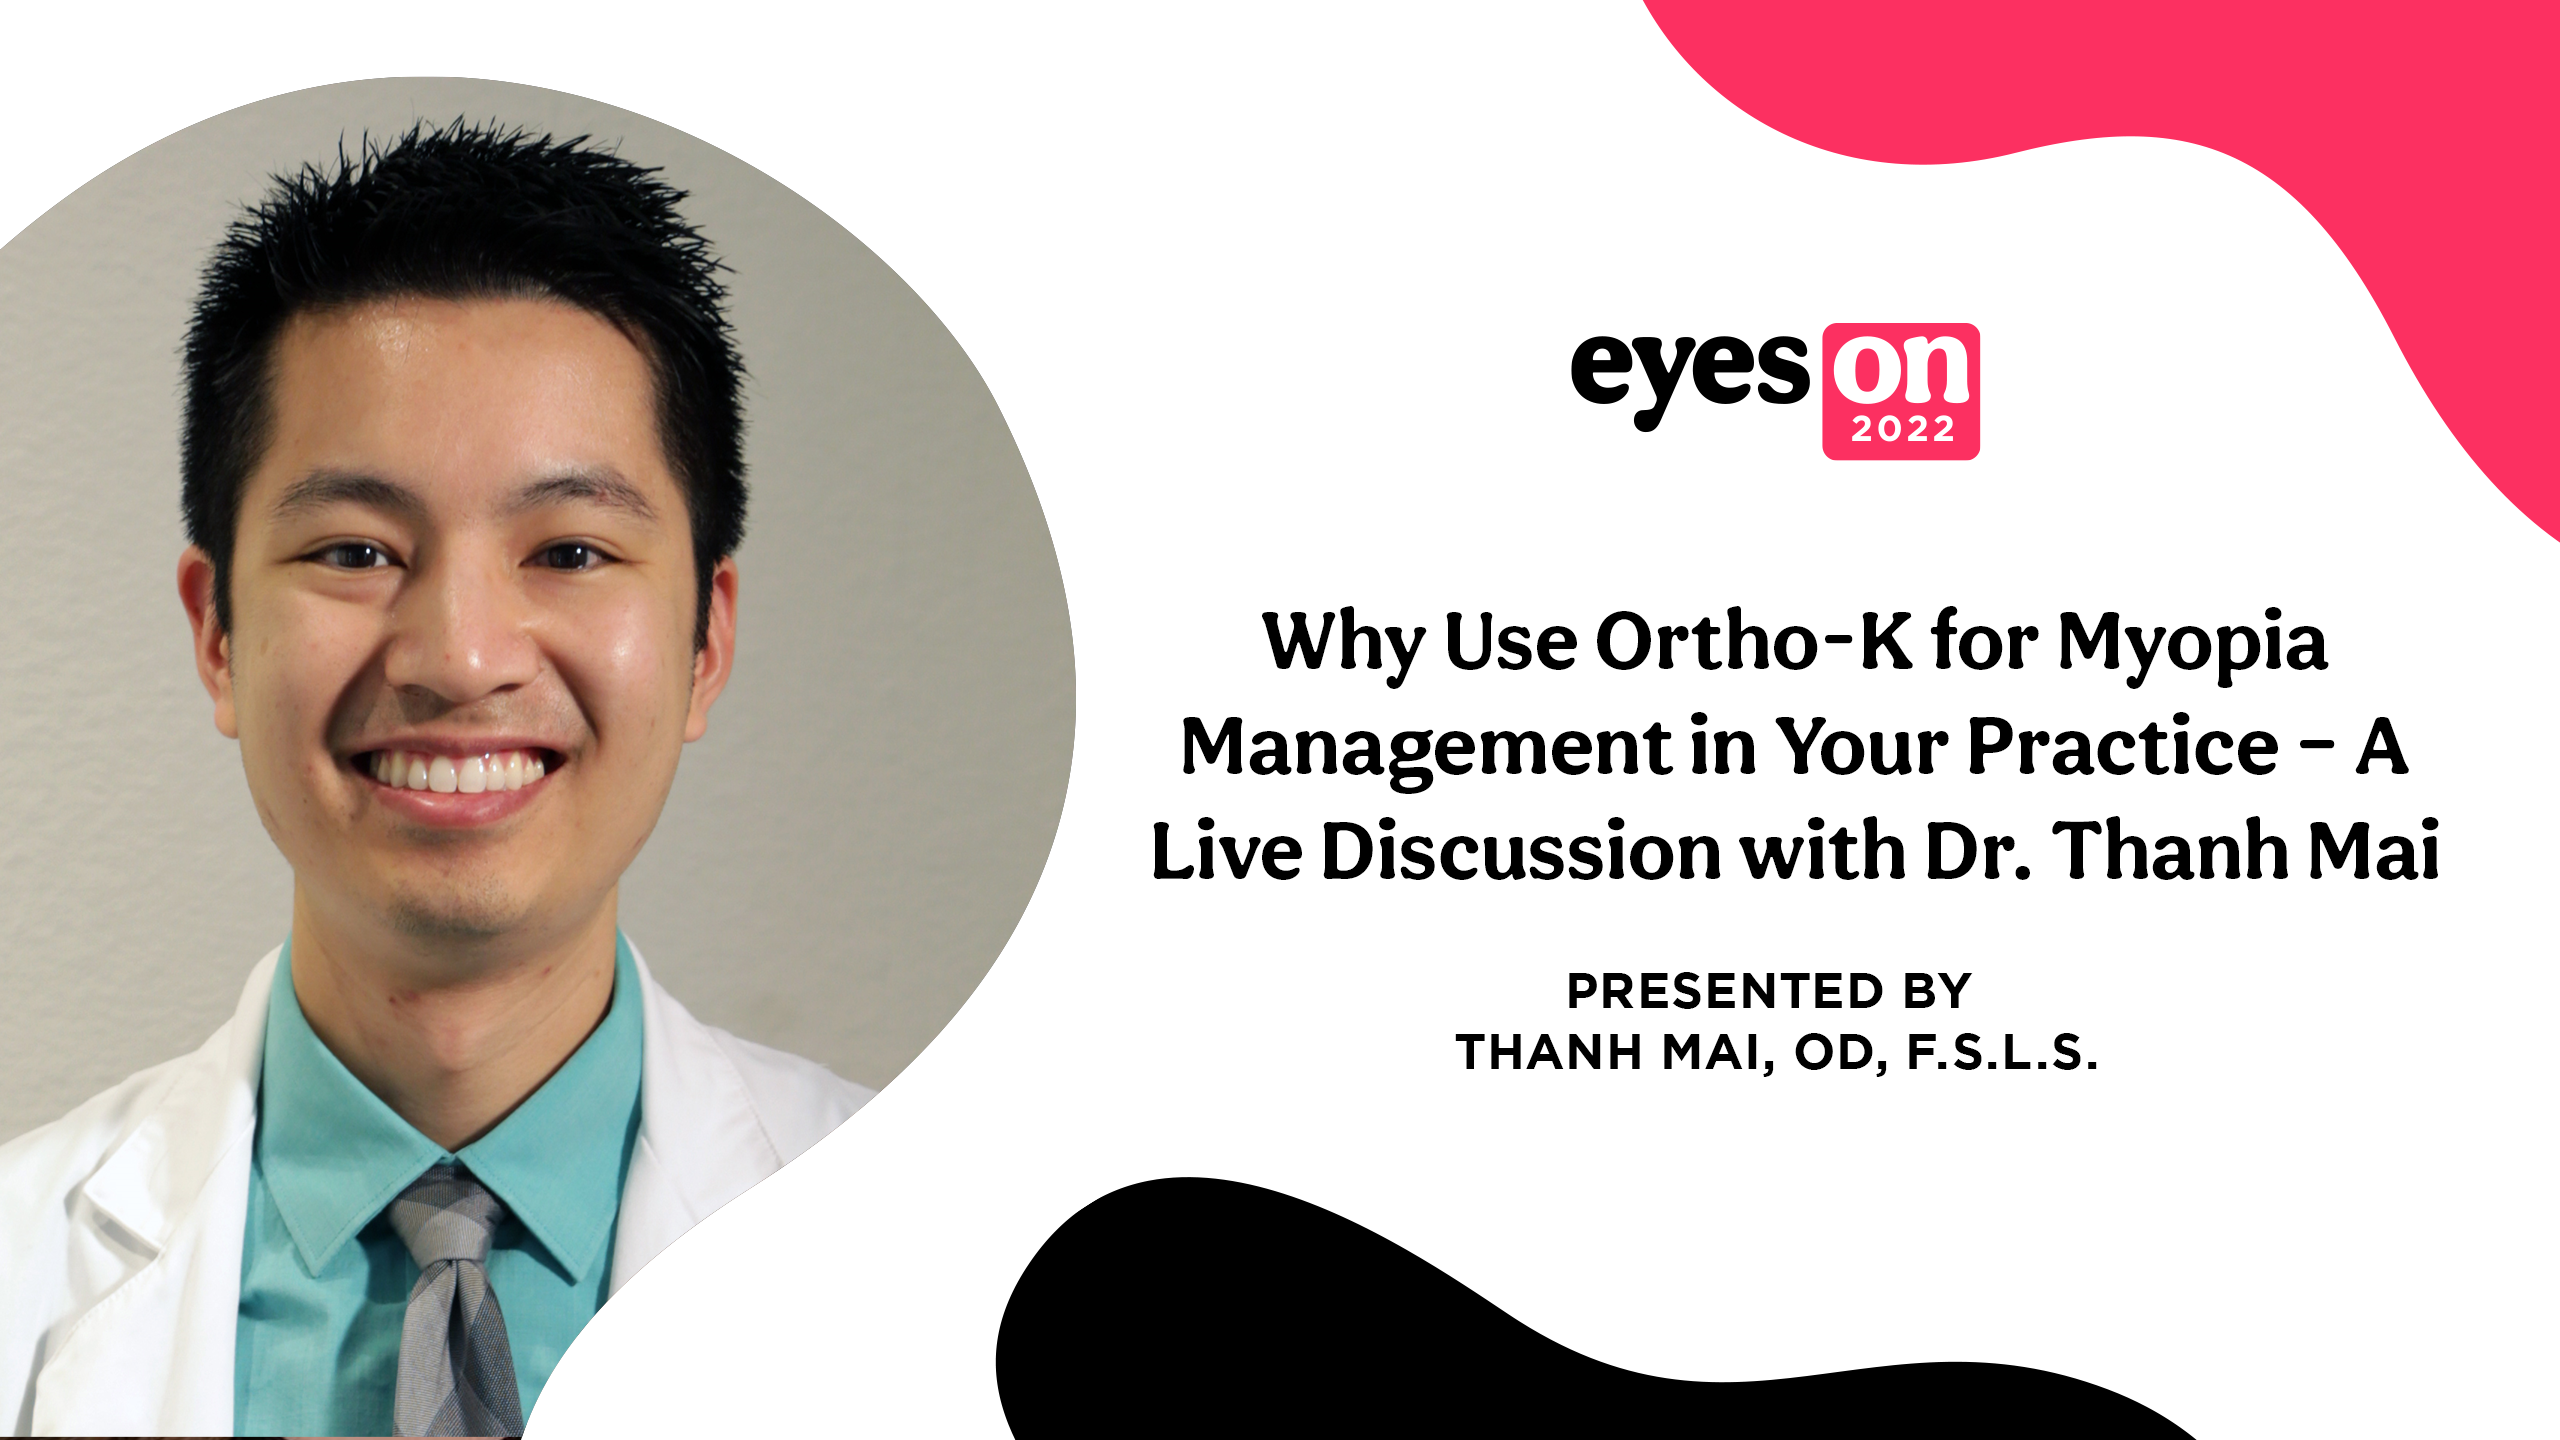 Why Use Ortho-k for Myopia Management in Your Practice